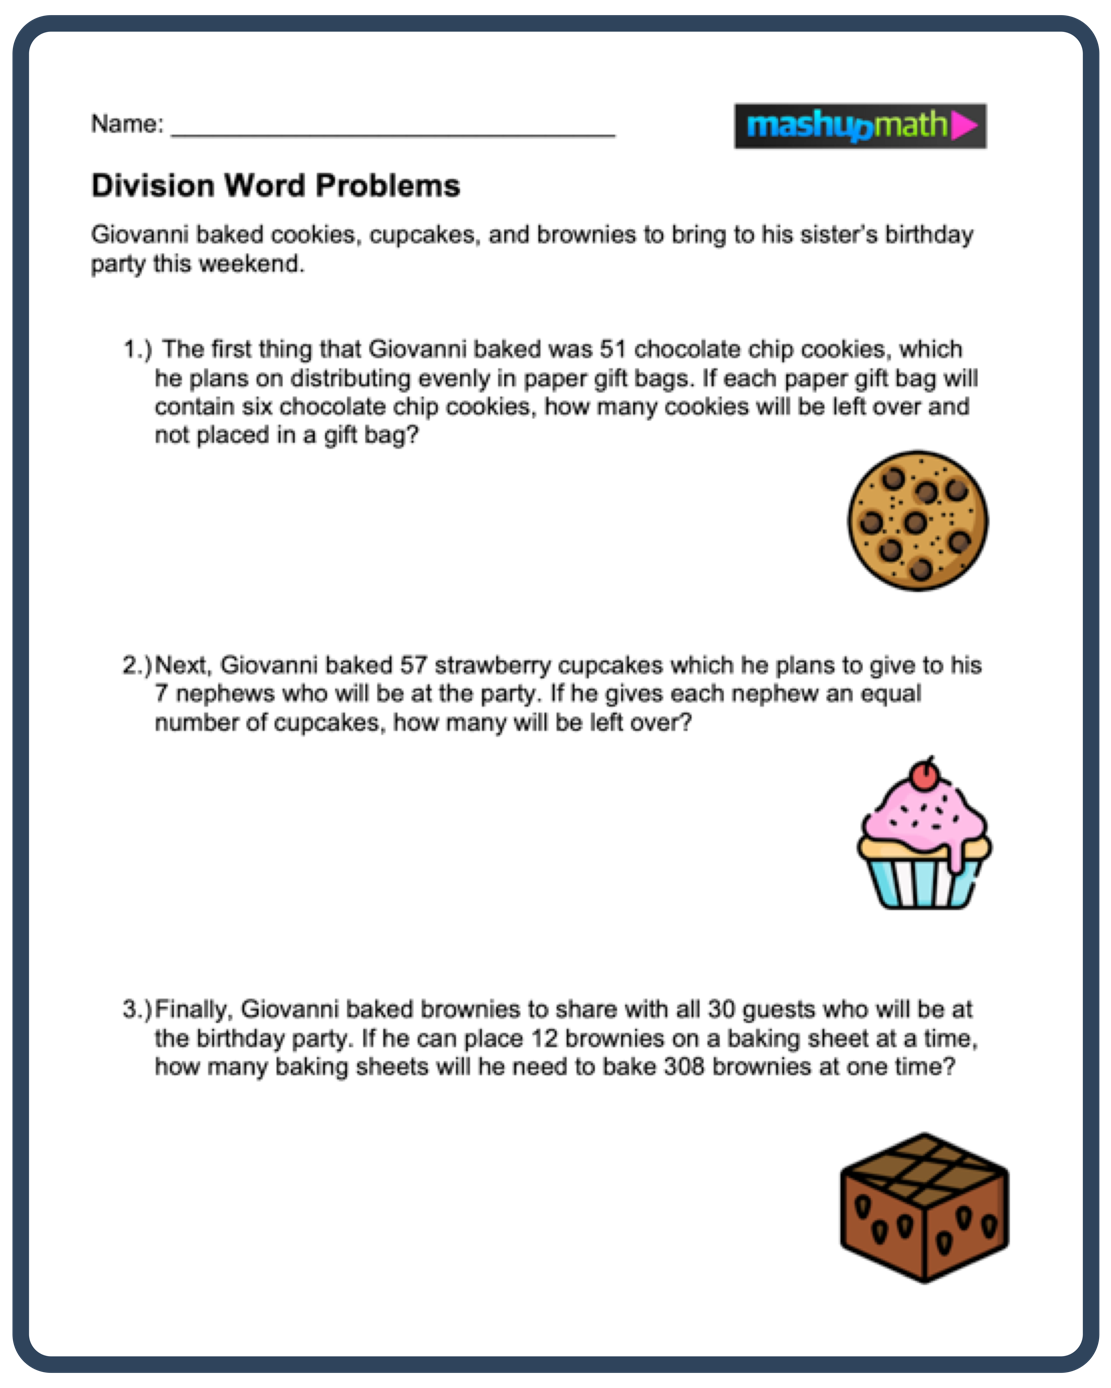 Division Word Problems Free Worksheets For Grades 3 5 Mashup Math